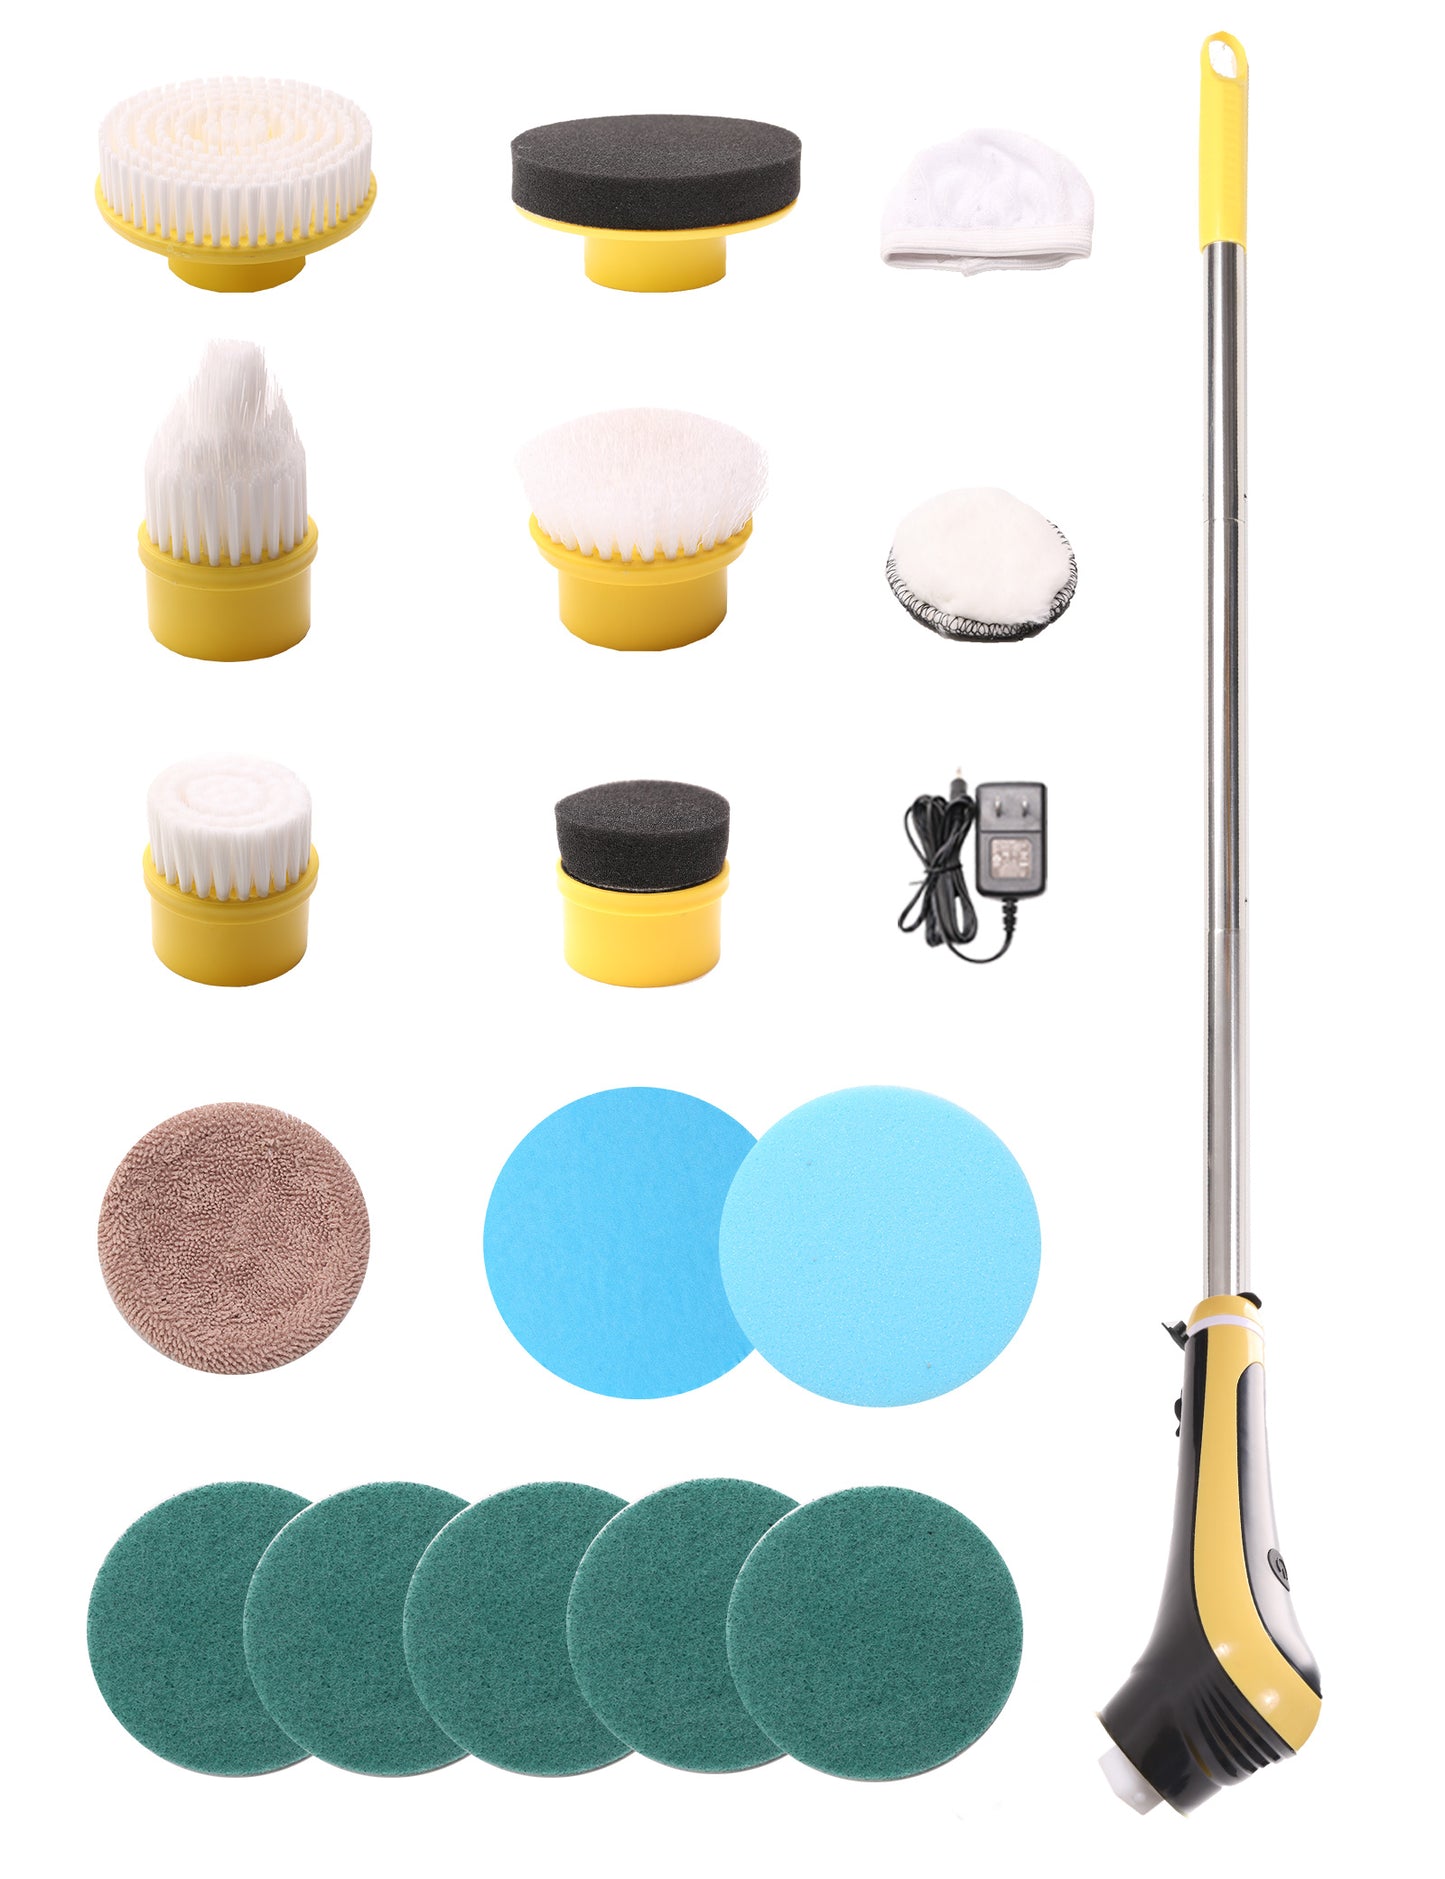 Electric Spin Scrubber, Cordless Shower Cleaning Brush with 8 Replaceable Brush Heads, 3 Adjustable Speeds, Detachable & Extendable Long Handle